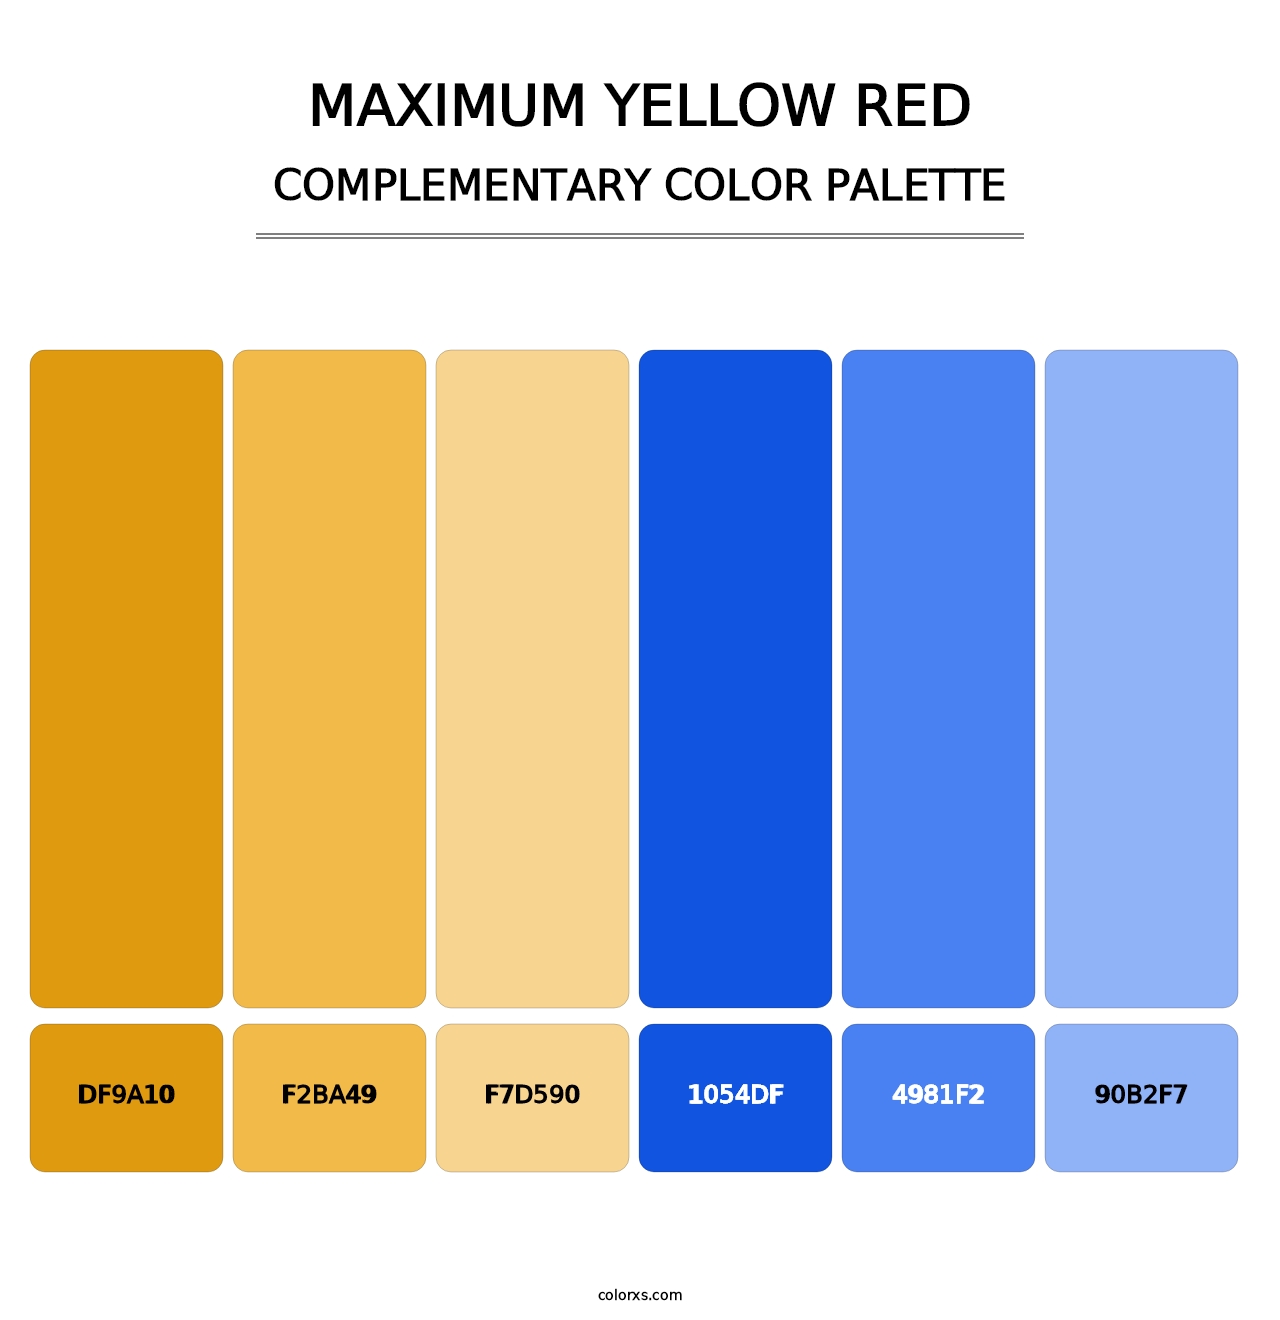 Maximum Yellow Red - Complementary Color Palette